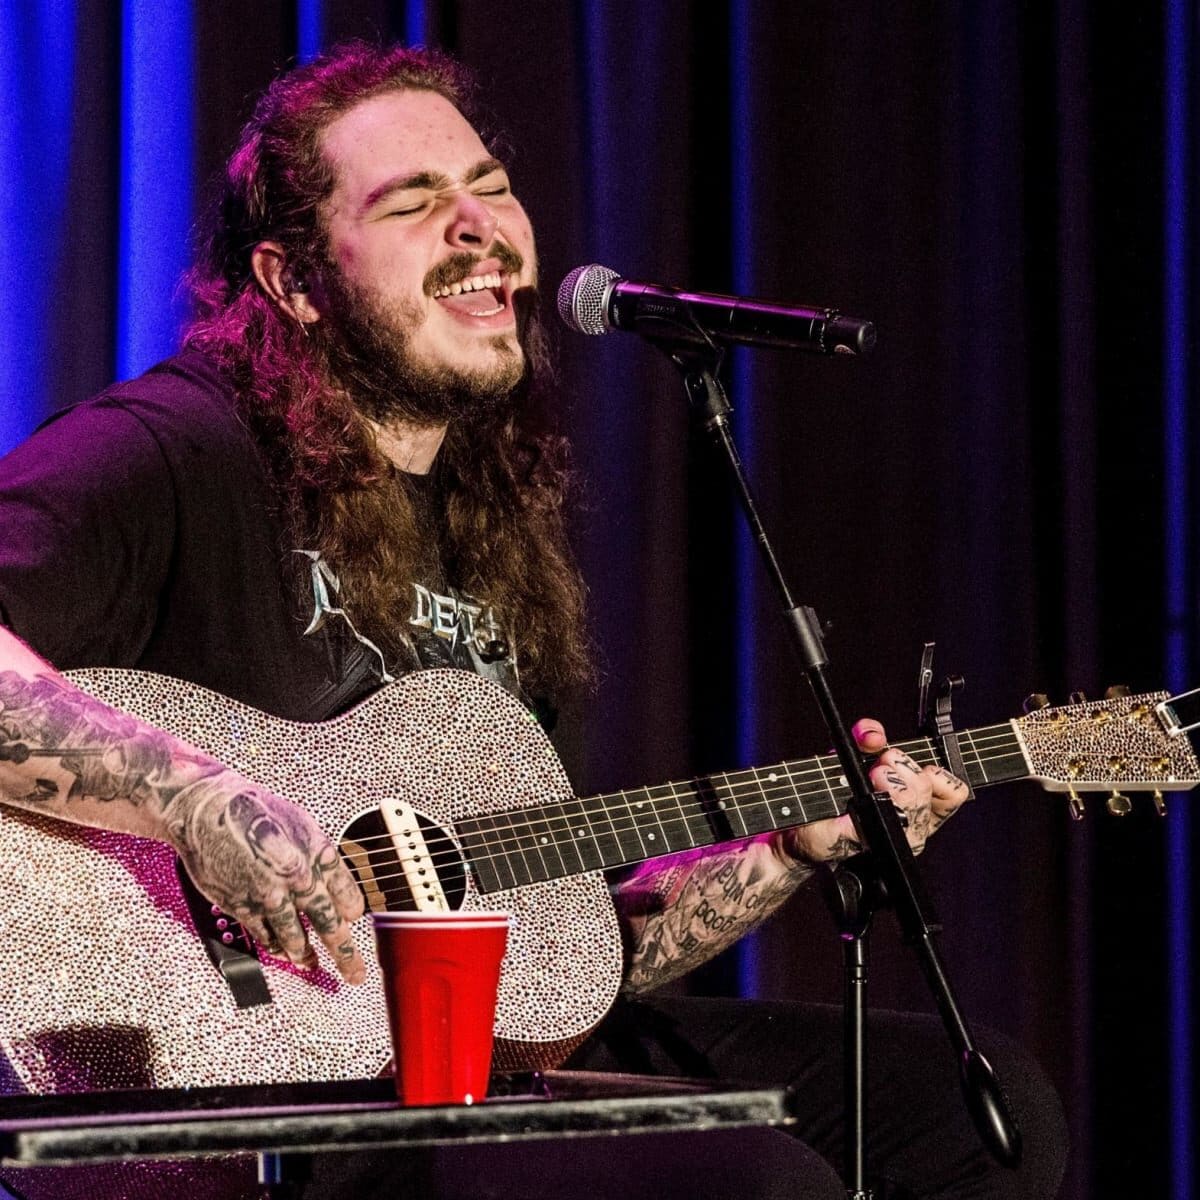 Watch Post Malone Grab a Guitar and Debut His New Moody Sound With "Stay" - Maxim